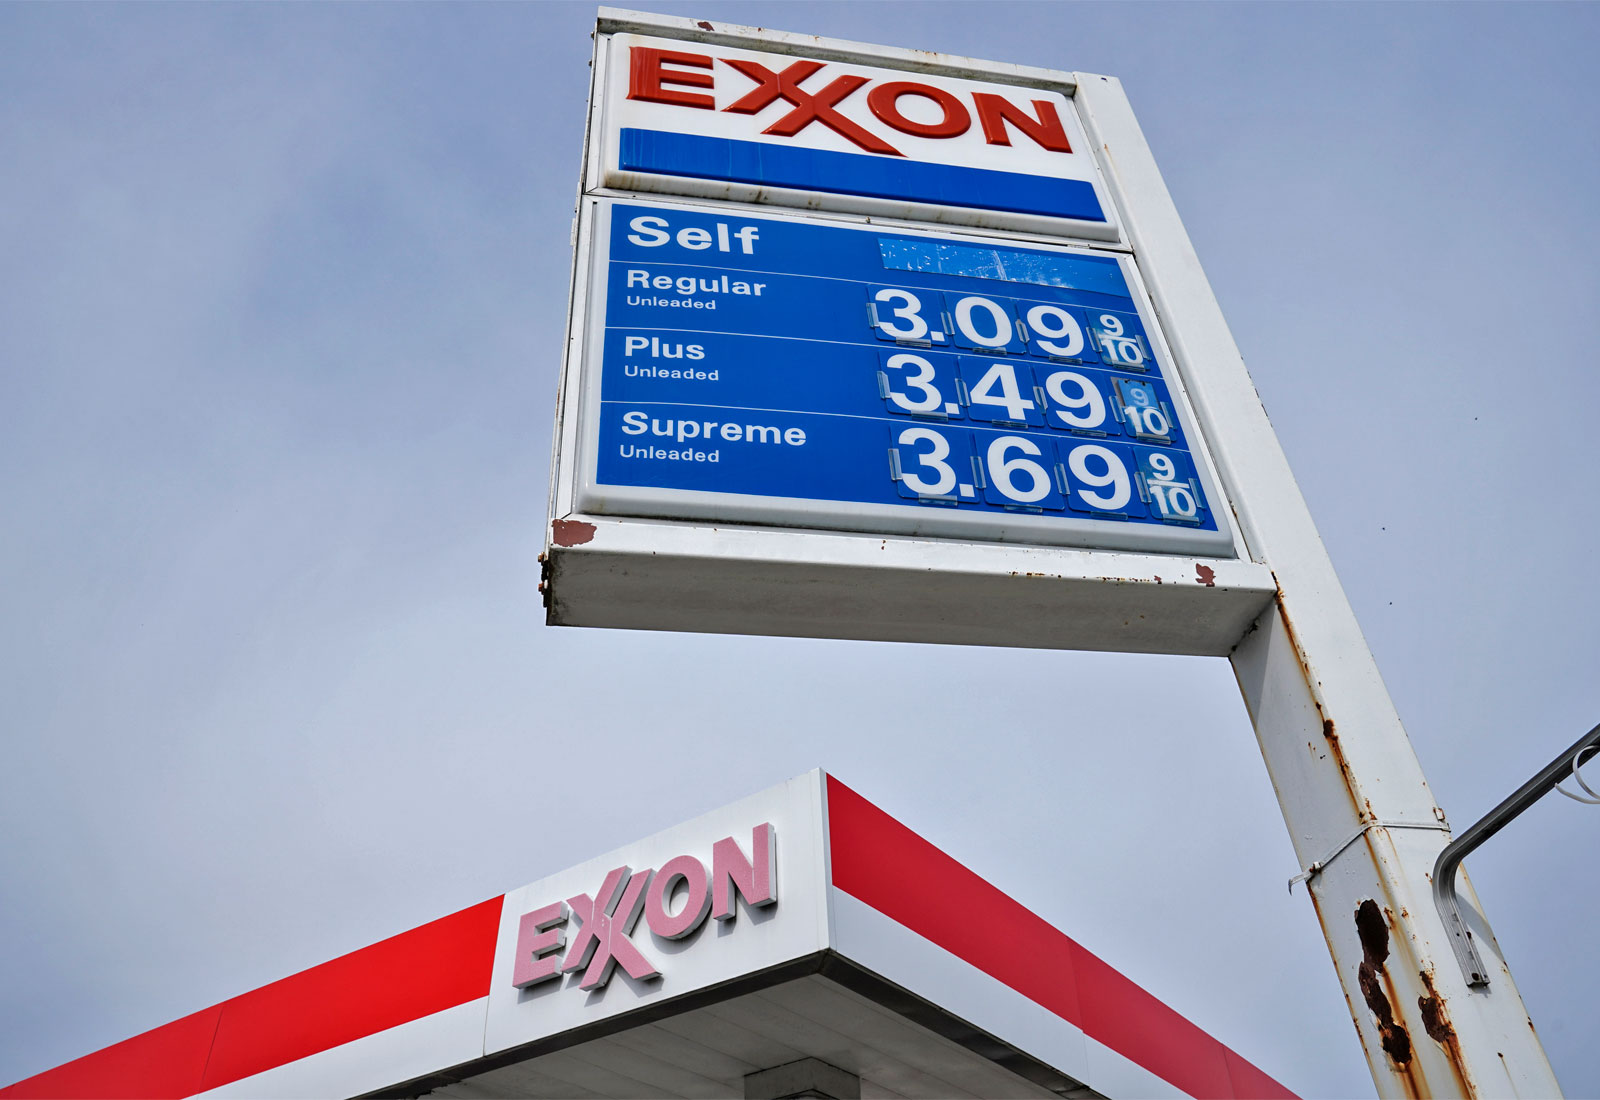 Low angle view of an Exxon gas station sign